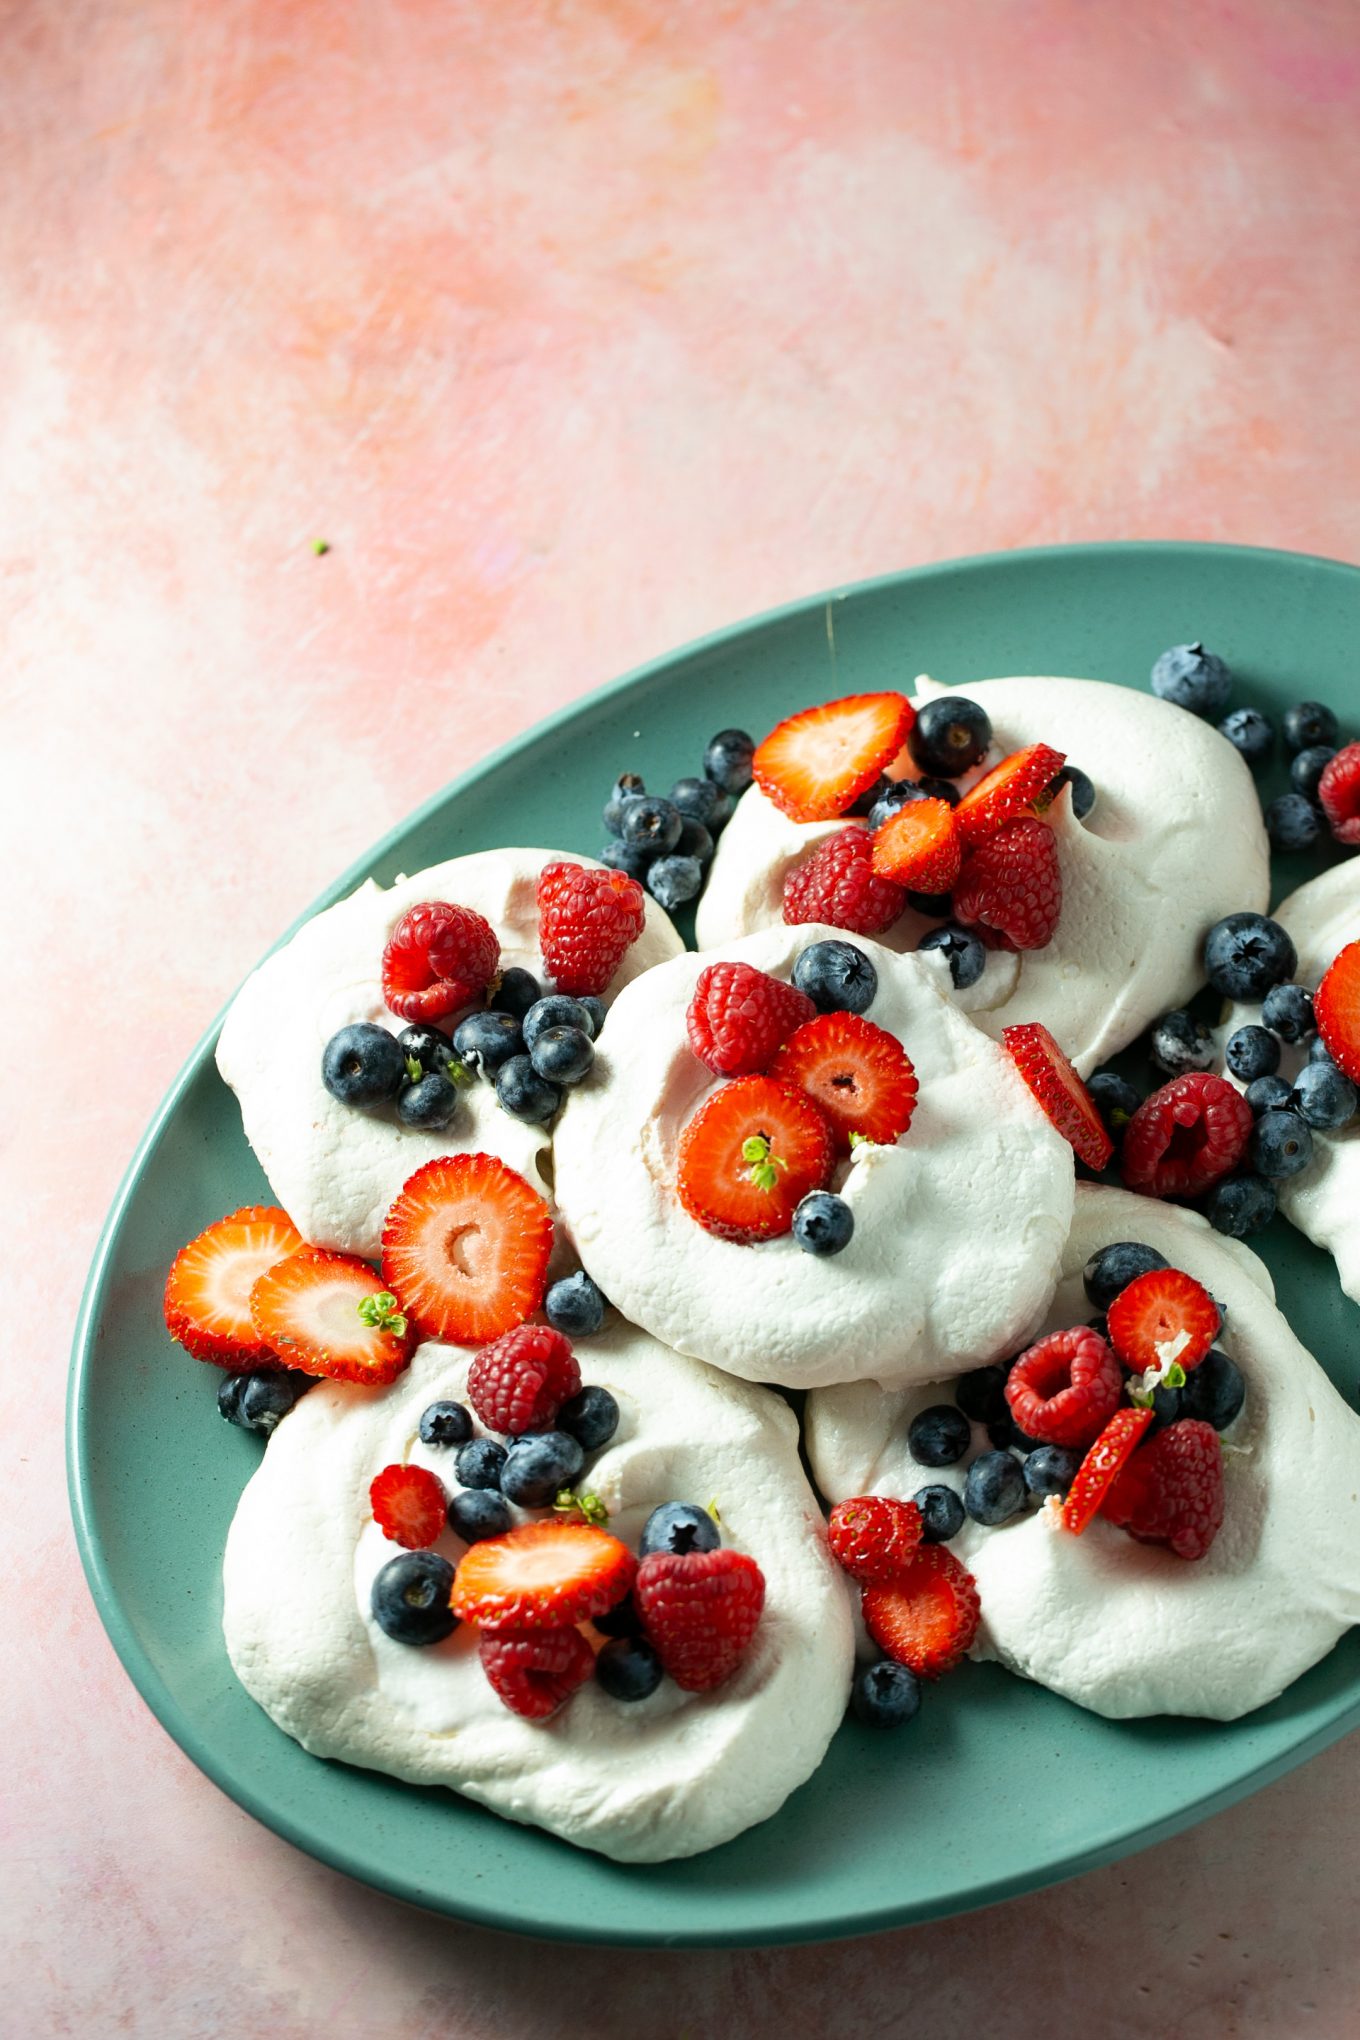 Vegan individual pavlovas topped with fresh berries and homemade coconut whipped cream